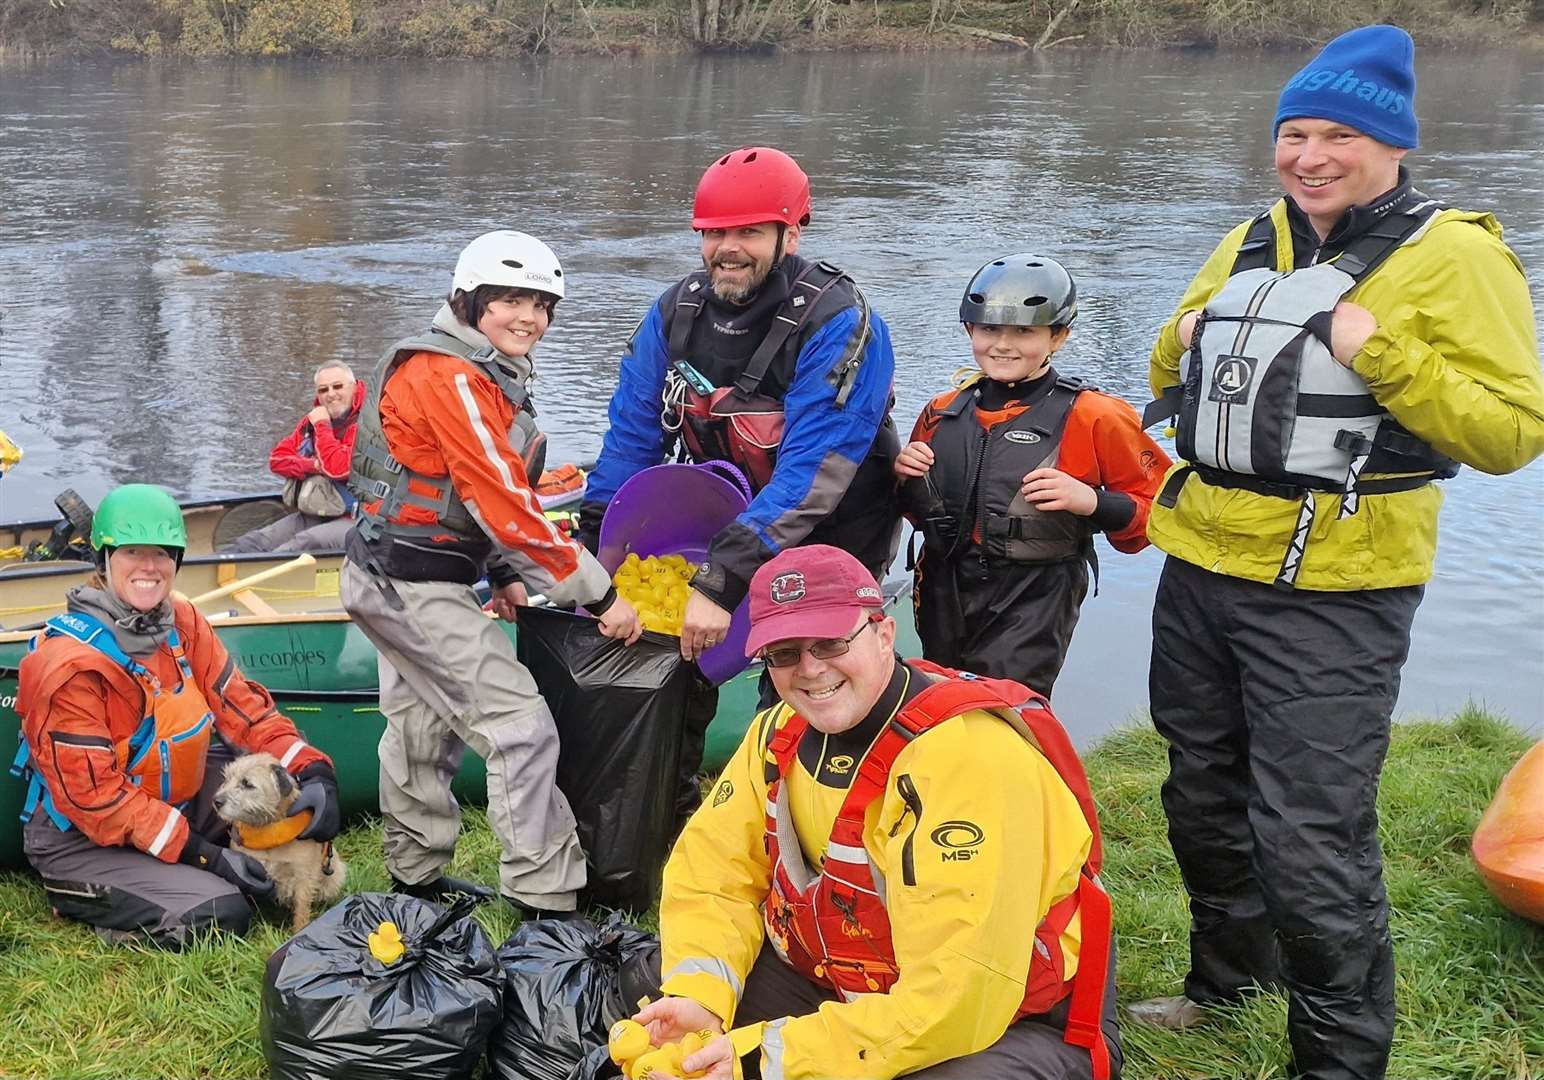 Inverness Canoe Club paddlers and duck rescue crew (from left) Ruth Mantle, Willie Macleod, Calum MacDonald, Neil MacDonald, Lachlann MacDonald and Jonathan Willet with Marybank Primary Parent helper, Roddy Cormack. Picture: Eleanor MacDonald